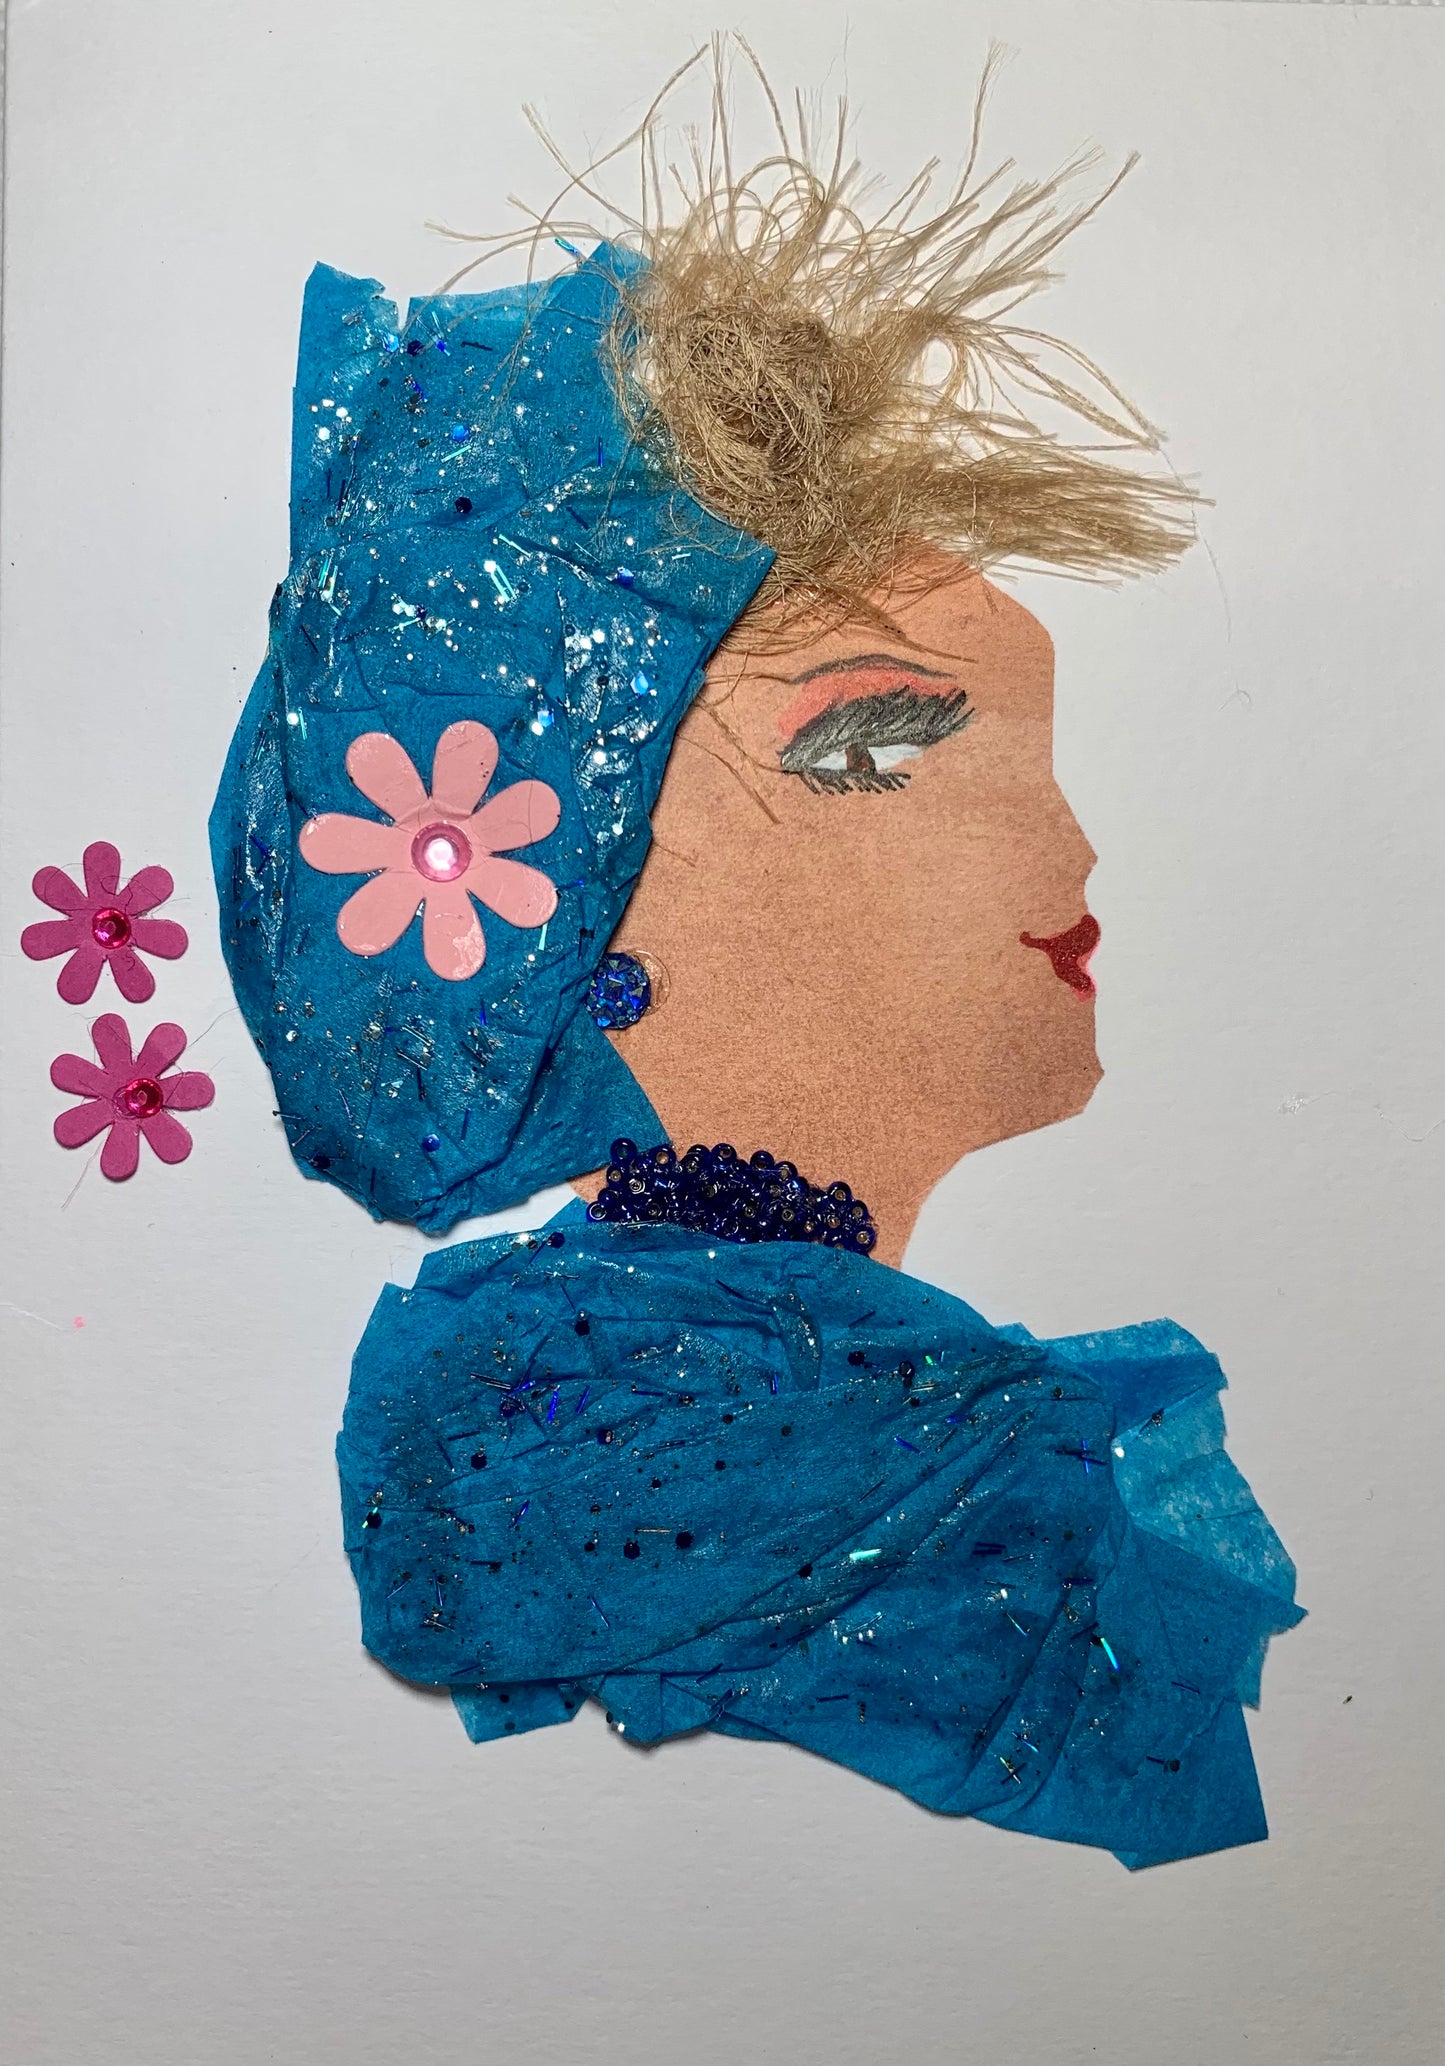 This card shows a woman wearing a blue matching dress and headscarf which has blue glitter on it. On the headscarf, there is a pink flower. In the background, there are two more pink flowers. 